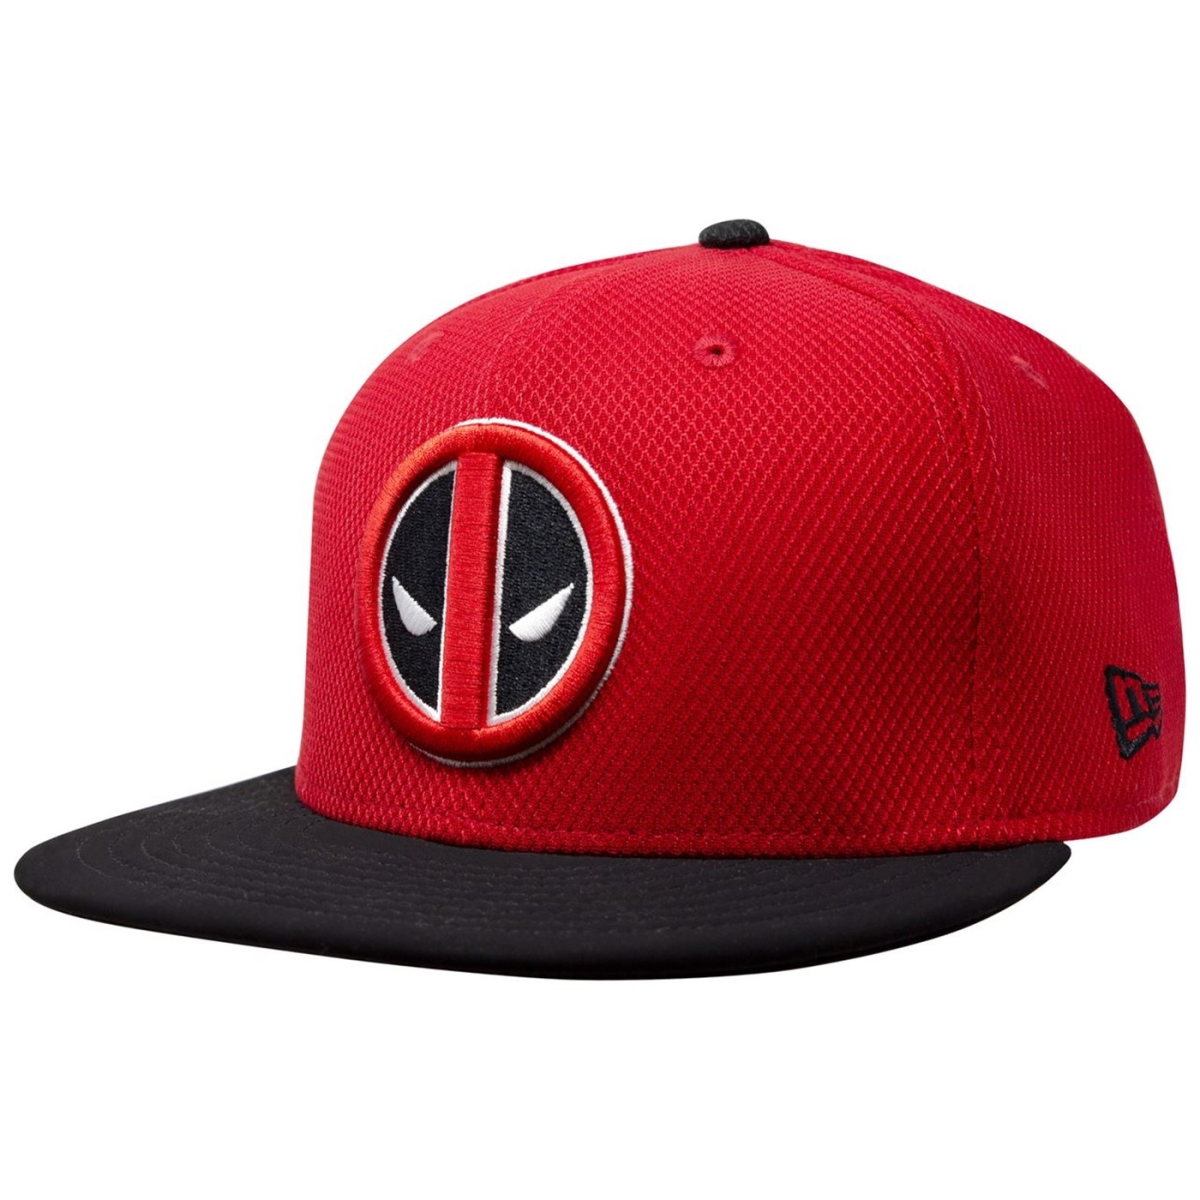 Picture of Deadpool hatdpsymrb5950-7-7 Fitted Deadpool Symbol Red & Black 59Fifty Fitted Hat - Size 7